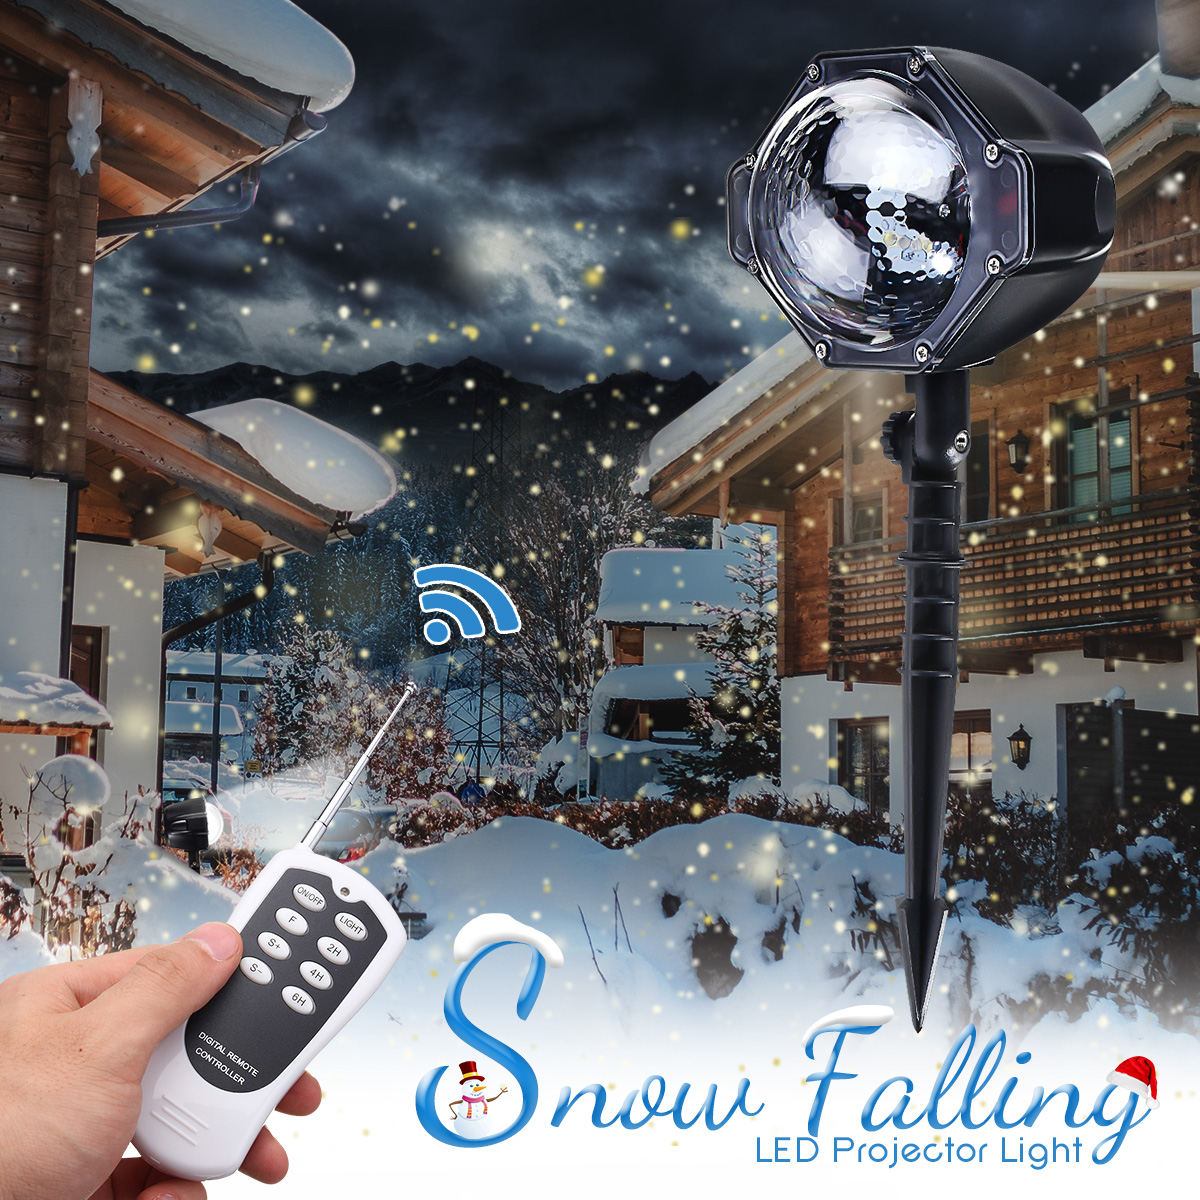 Elfeland-LED-Snowfall--Lights-with-Remote-Control-Waterproof-Rotating-Snowflakes-Projector-Light-Pro-1893262-1